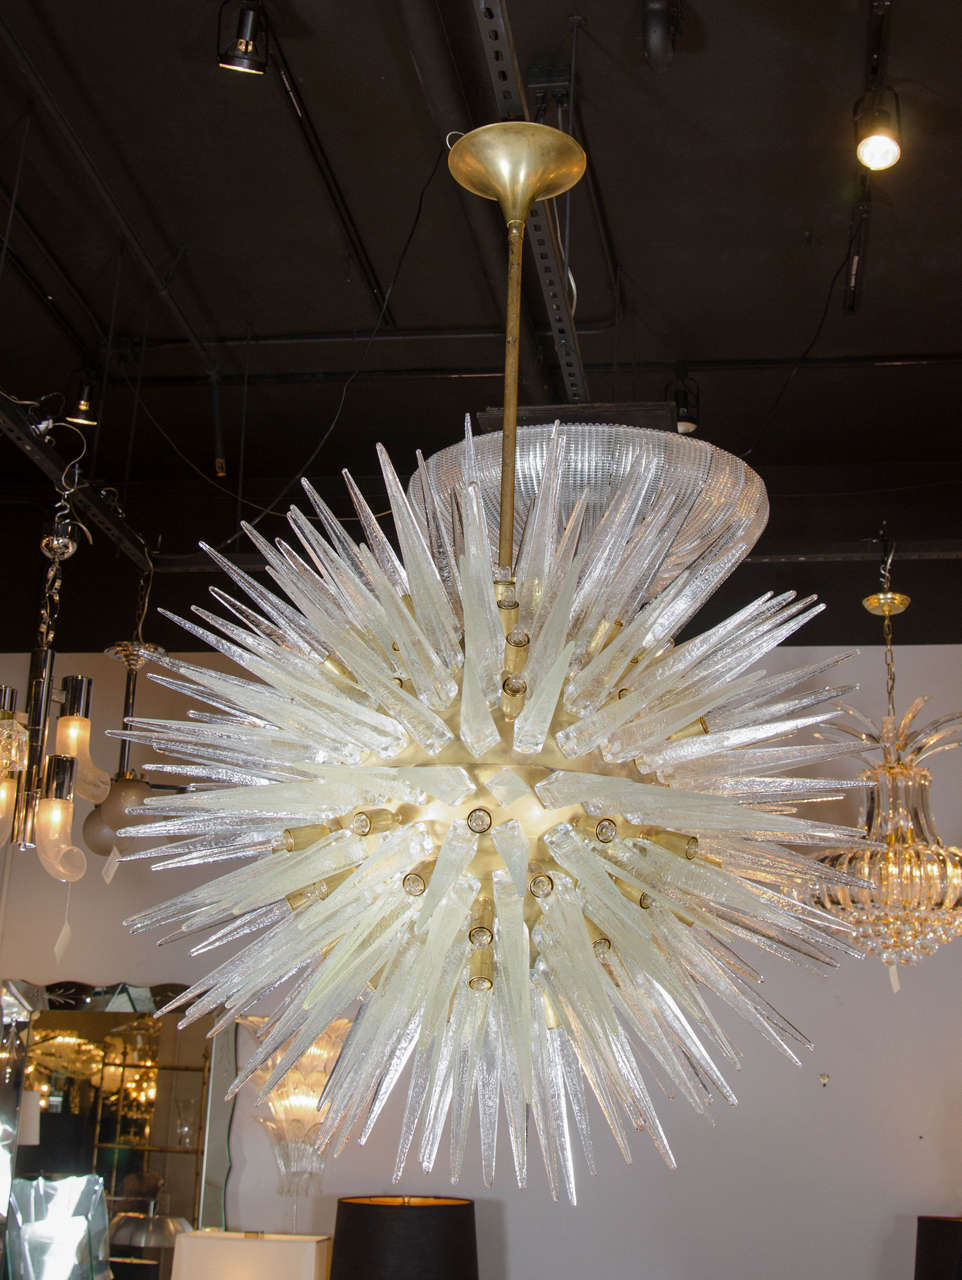 This important Mid-Century Modern sputnik chandelier features large handblown textured Murano glass spikes fixed directly to a large brushed brass central sphere. The chandelier has more than 80 bulbs and hangs from a rod which can be adjusted to